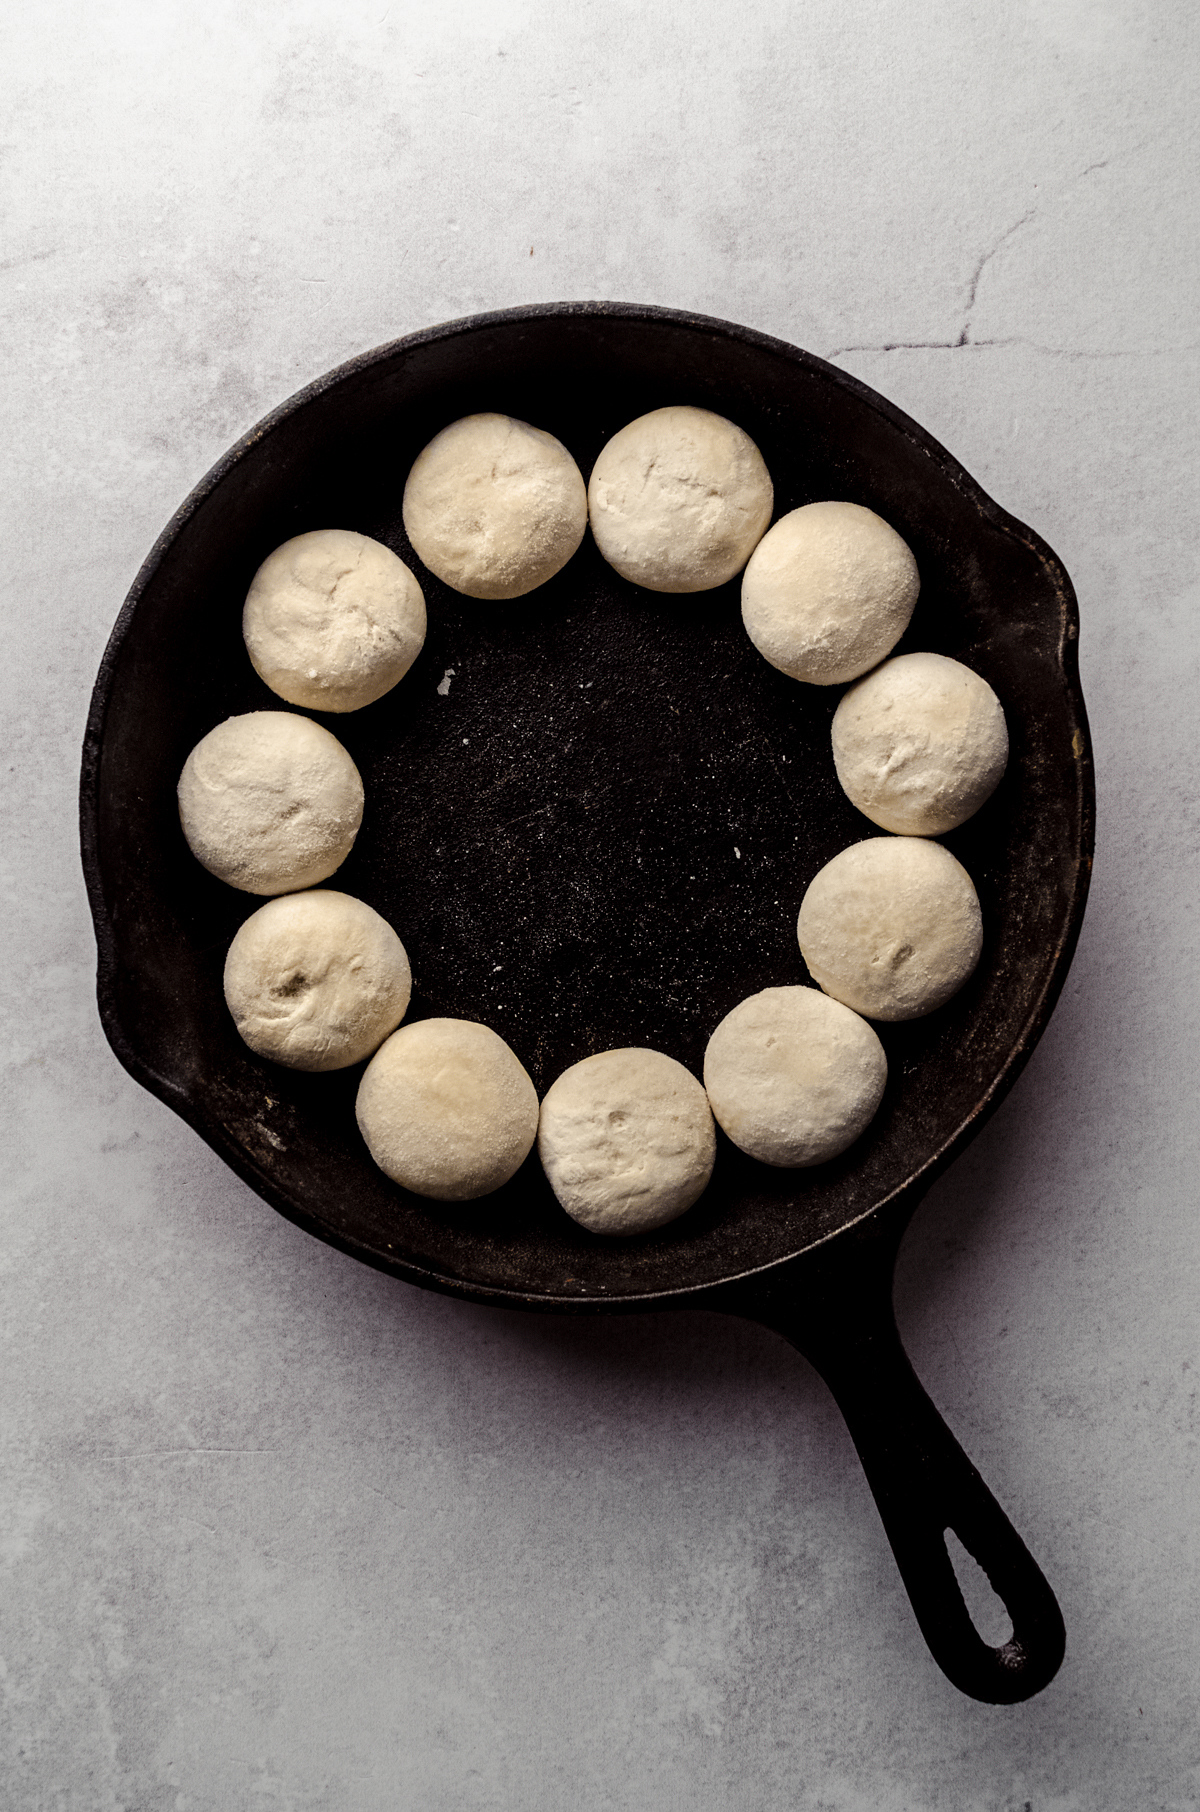 A skillet has been lined with frozen dinner rolls to make pizza dip.